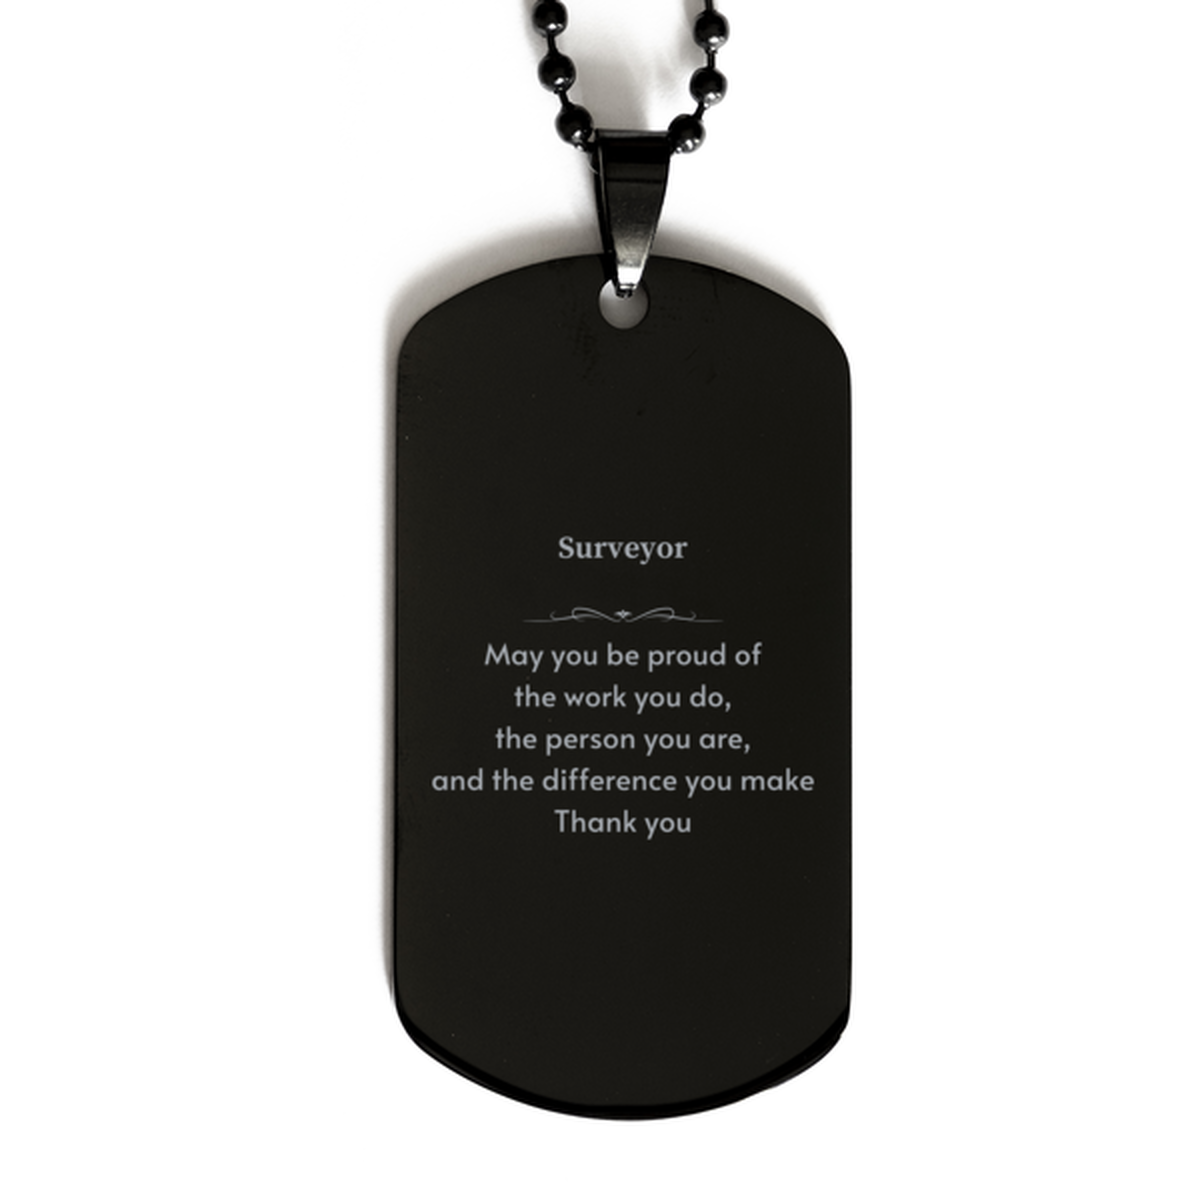 Heartwarming Black Dog Tag Retirement Coworkers Gifts for Surveyor, Surveyor May You be proud of the work you do, the person you are Gifts for Boss Men Women Friends